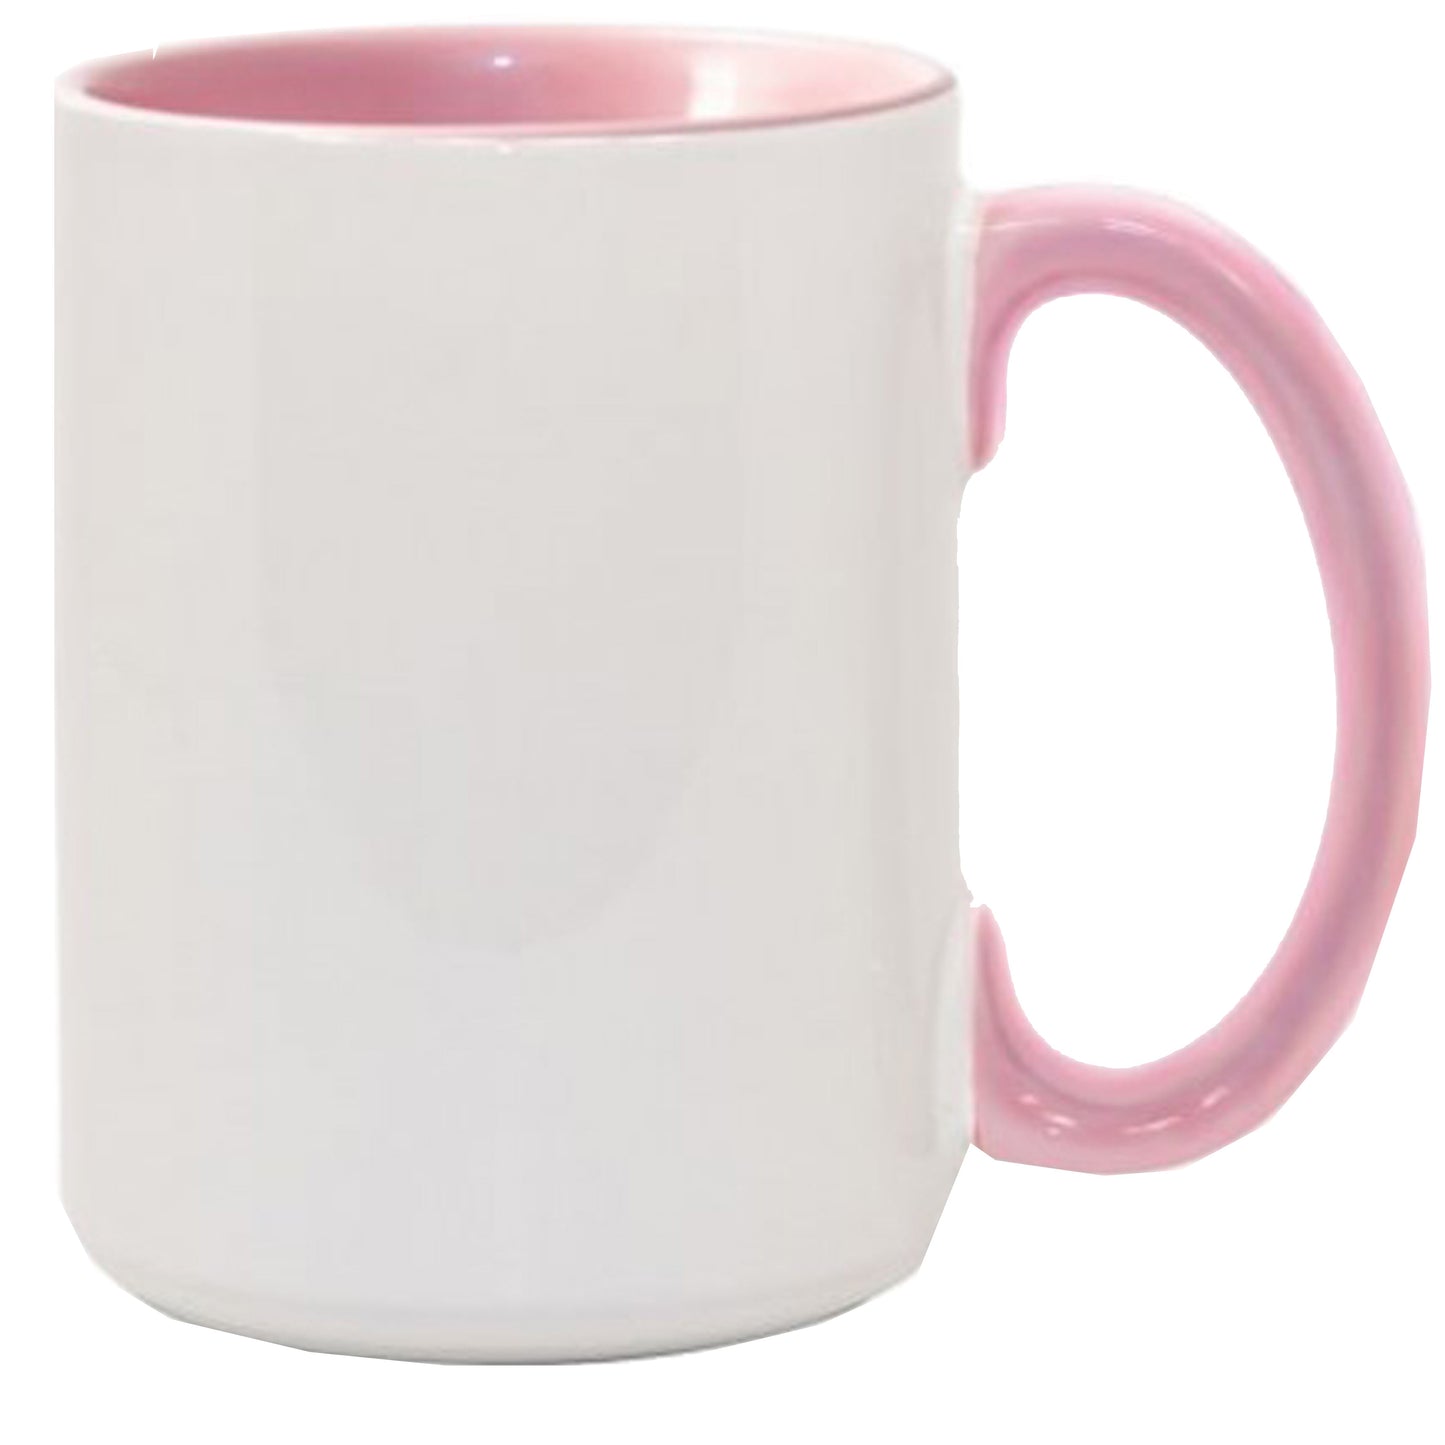 6 Pack-15 once White sublimation mugs inner color PINK  and handle with reinforced foam box packaging